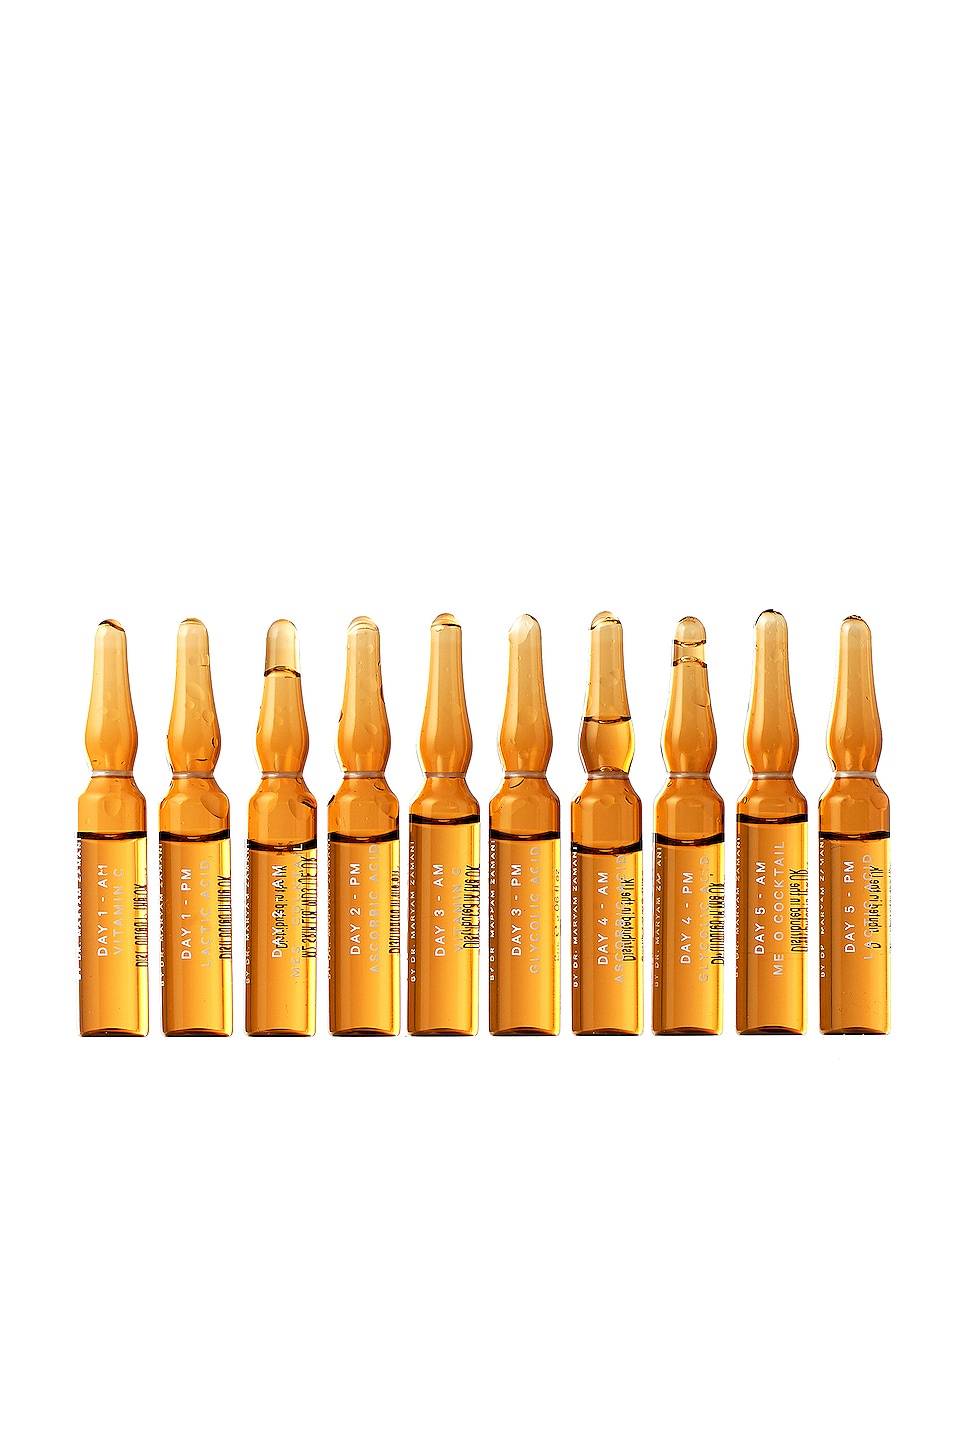 Glow Boost Ampoules in Beauty: NA